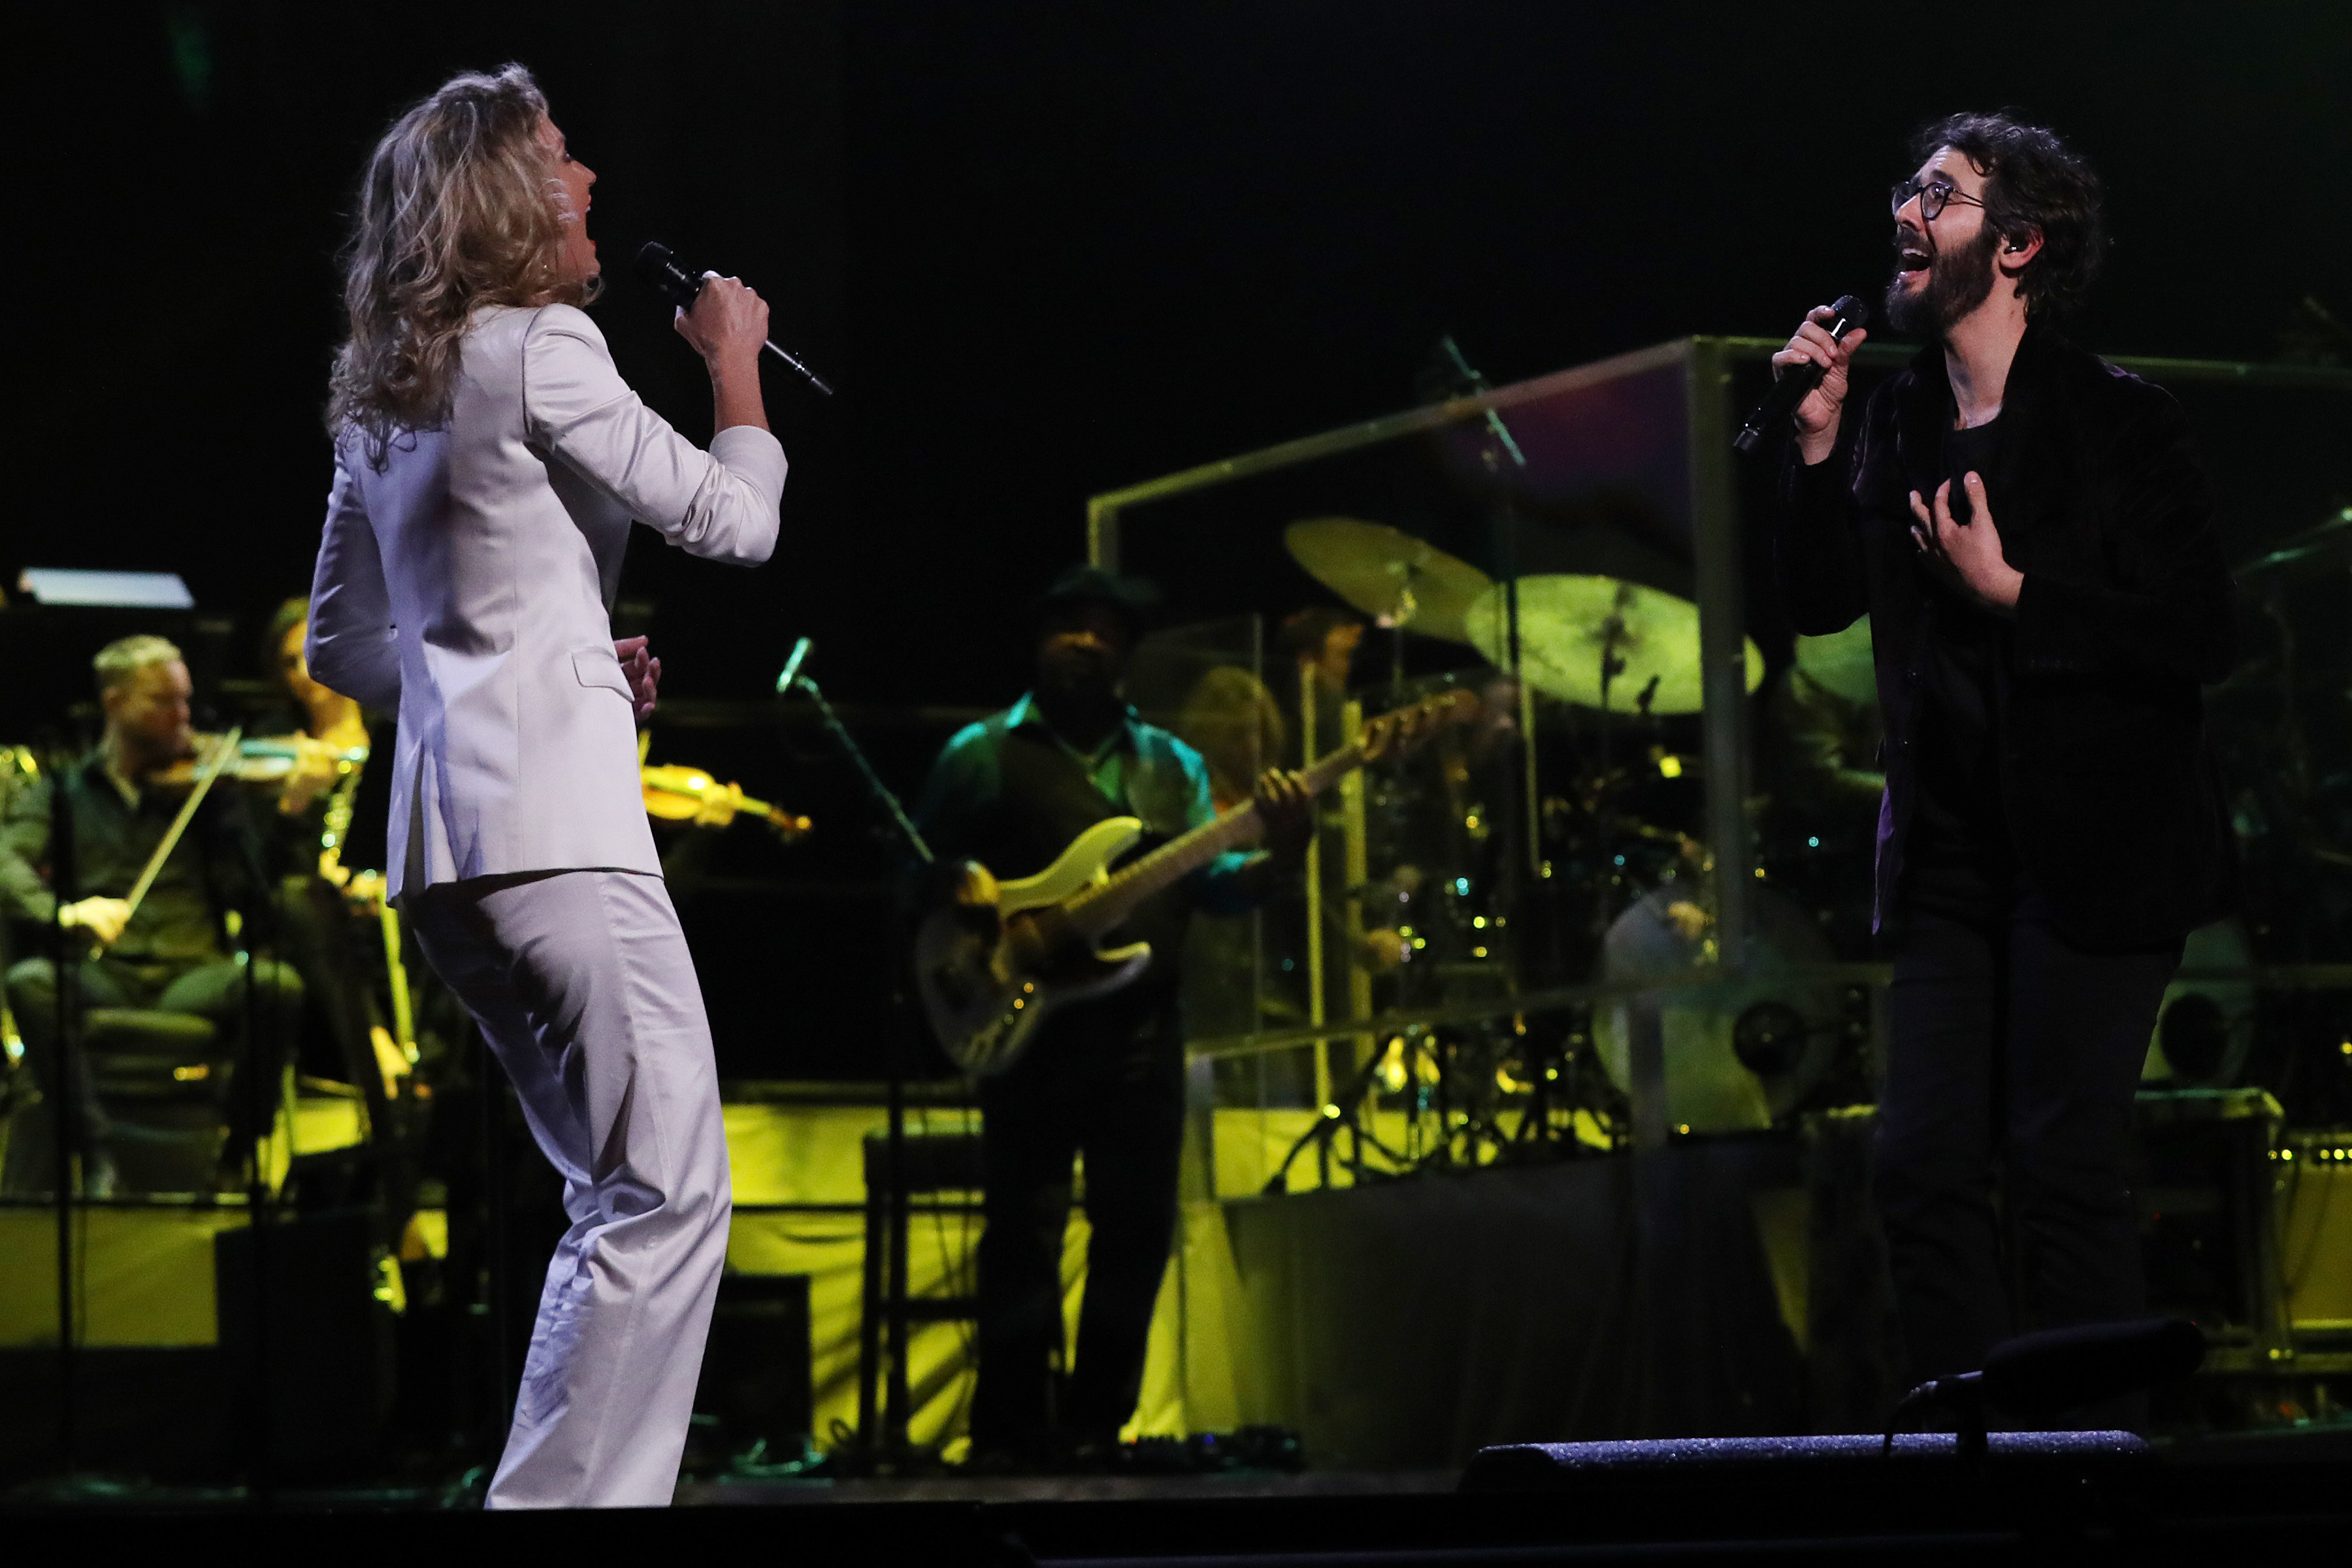 Watch Josh perform "99 Years" with Jennifer Nettles live from Madison Square Garden!